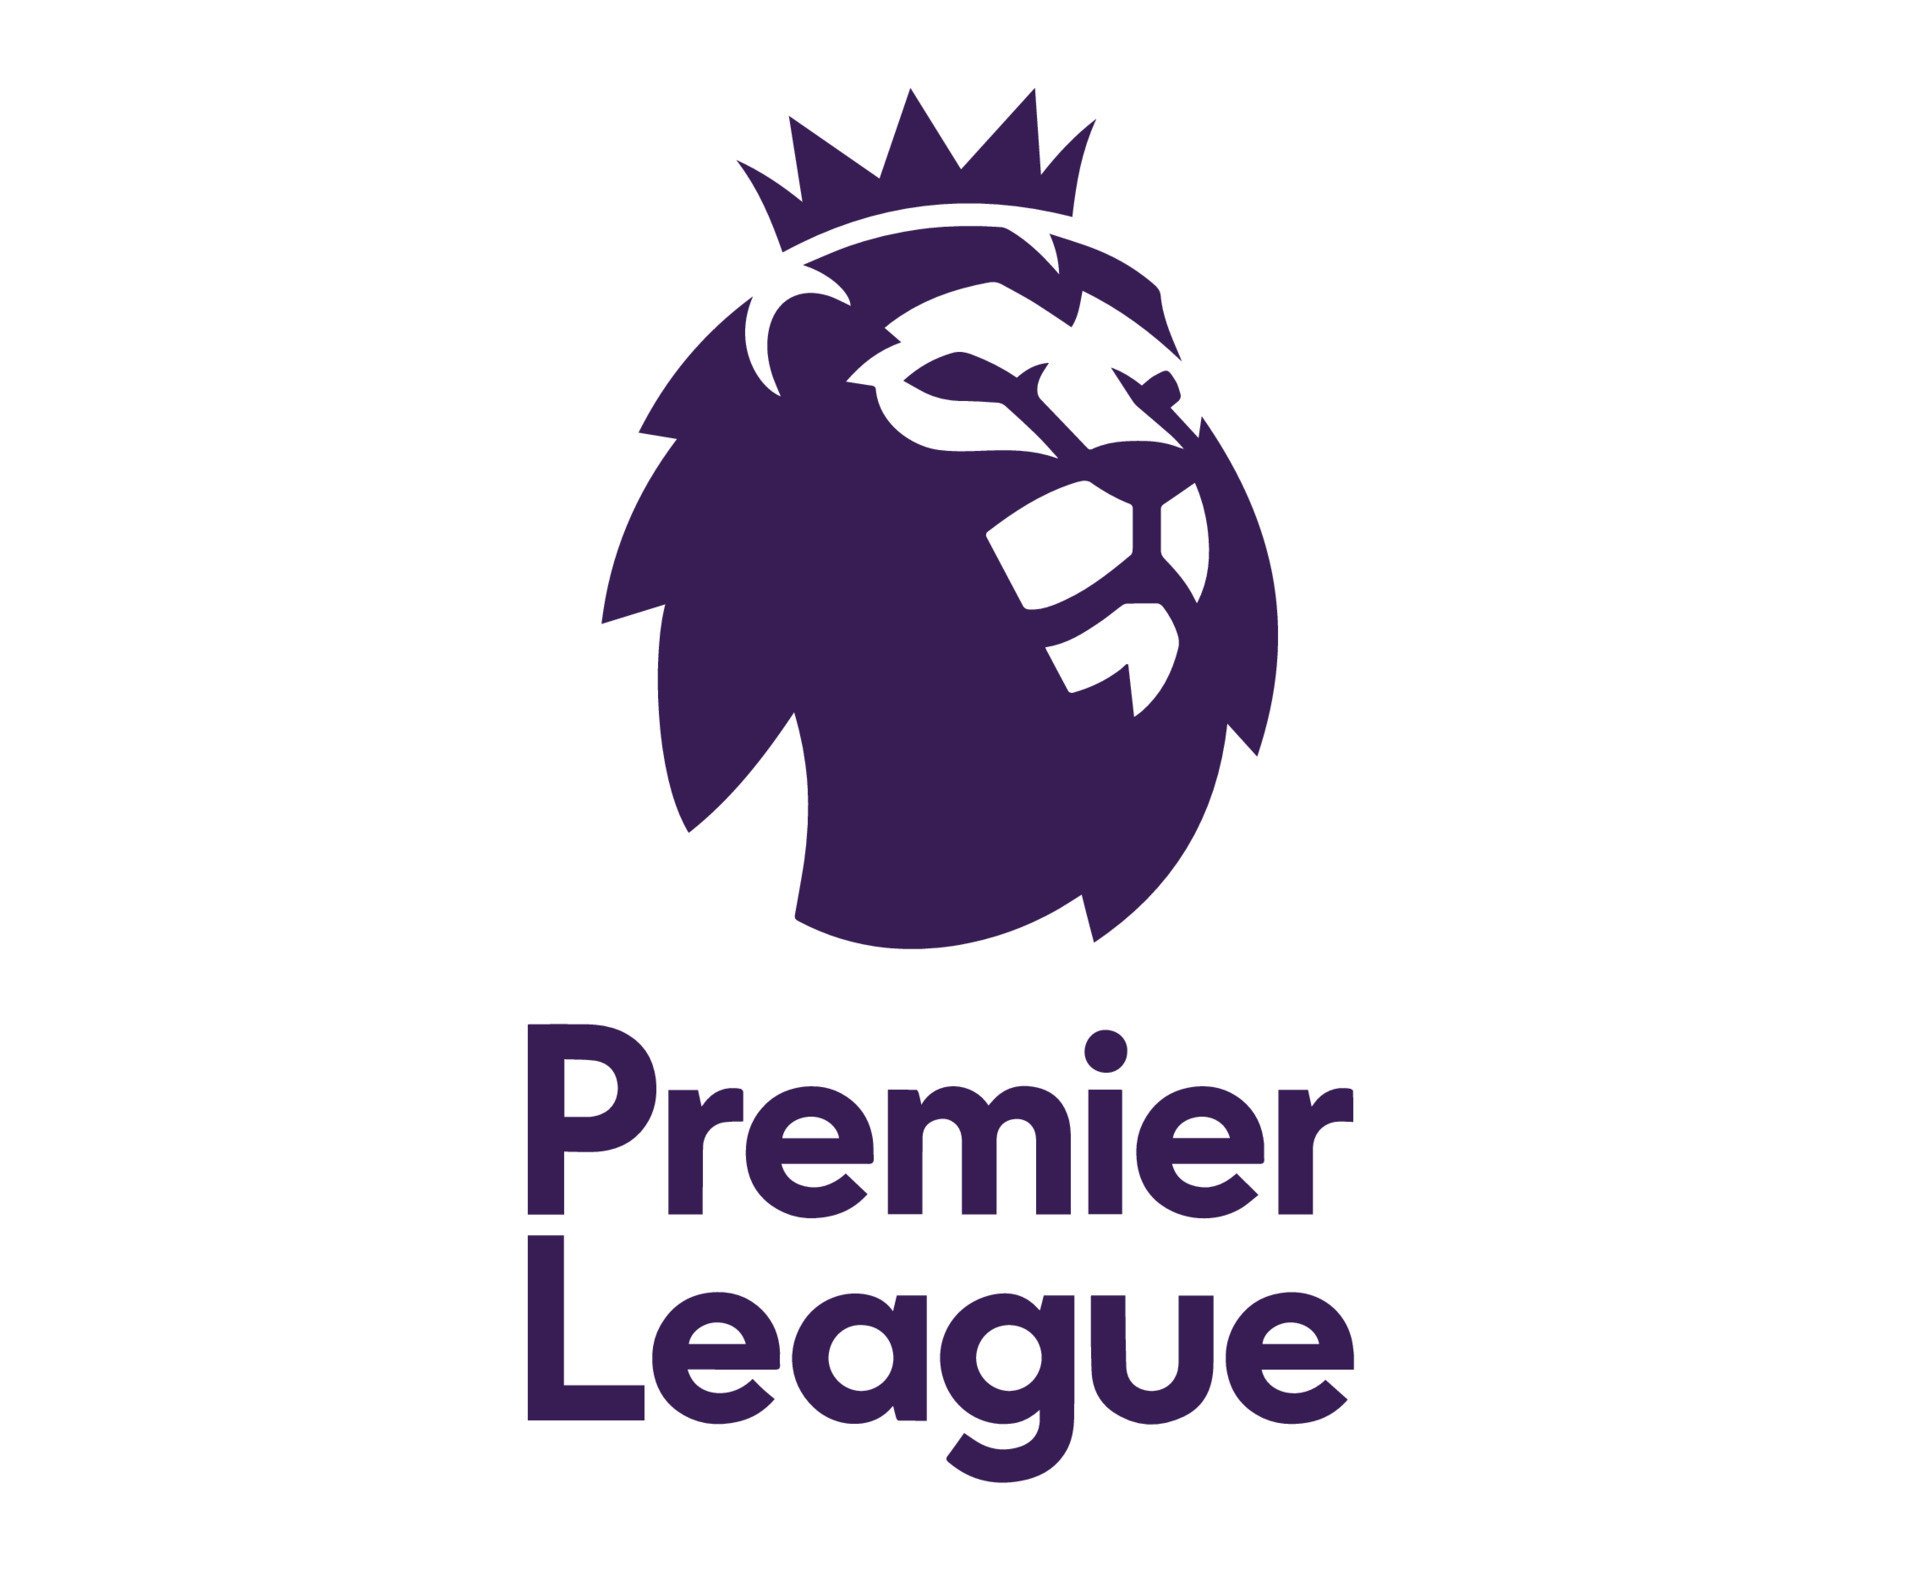 premier-league-logo-symbol-with-name-design-england-football-european-countries-football-teams-illustration-with-purple-background-free-vector.jpg